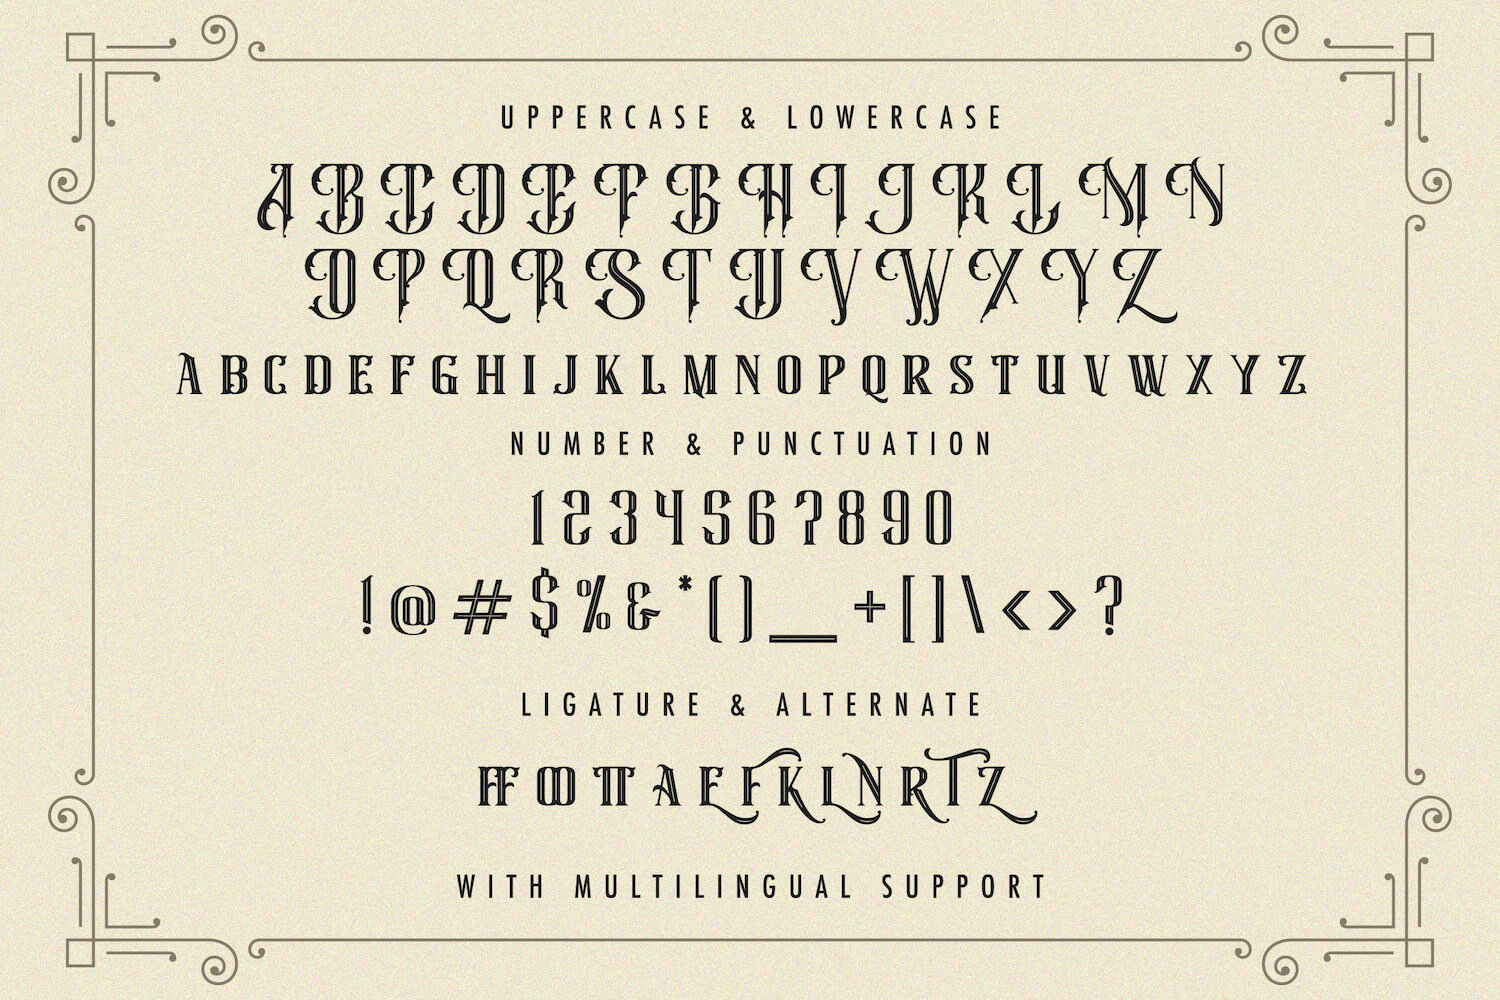 Super Byzantine Windows Font Free For Personal